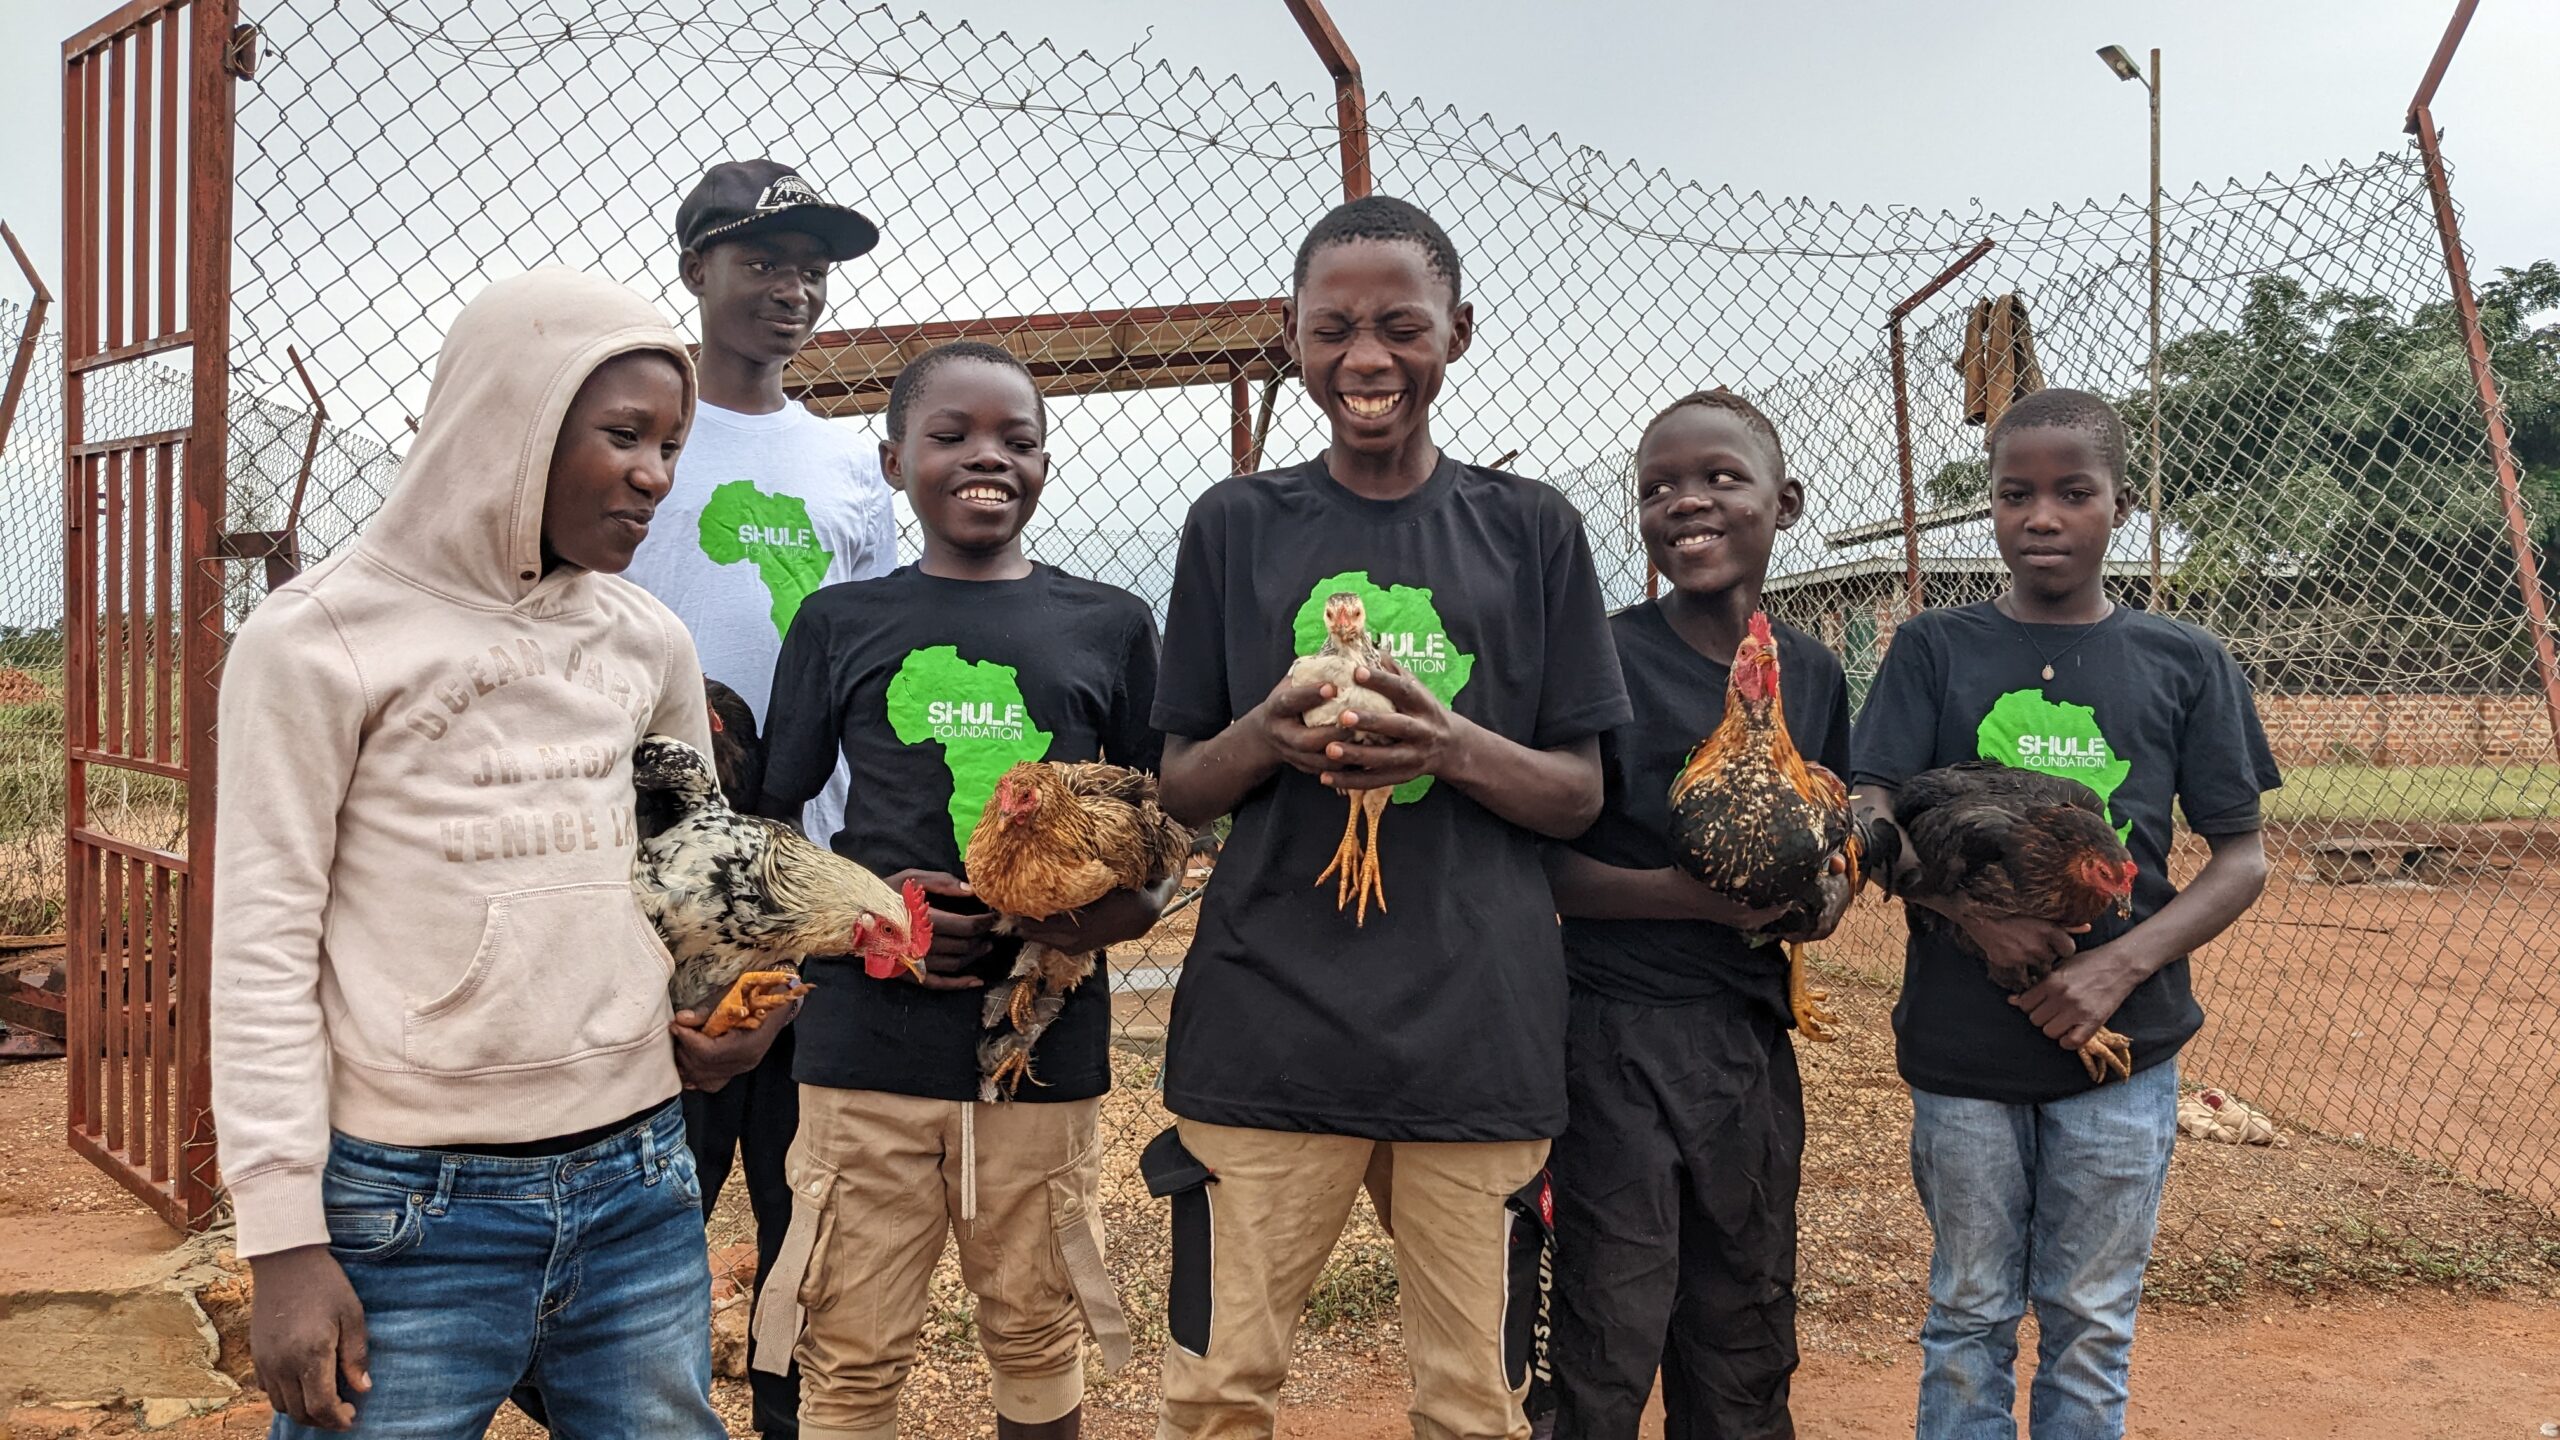 Shule boys caring for egg-laying chicken at the Shule Center for Eggsellence.